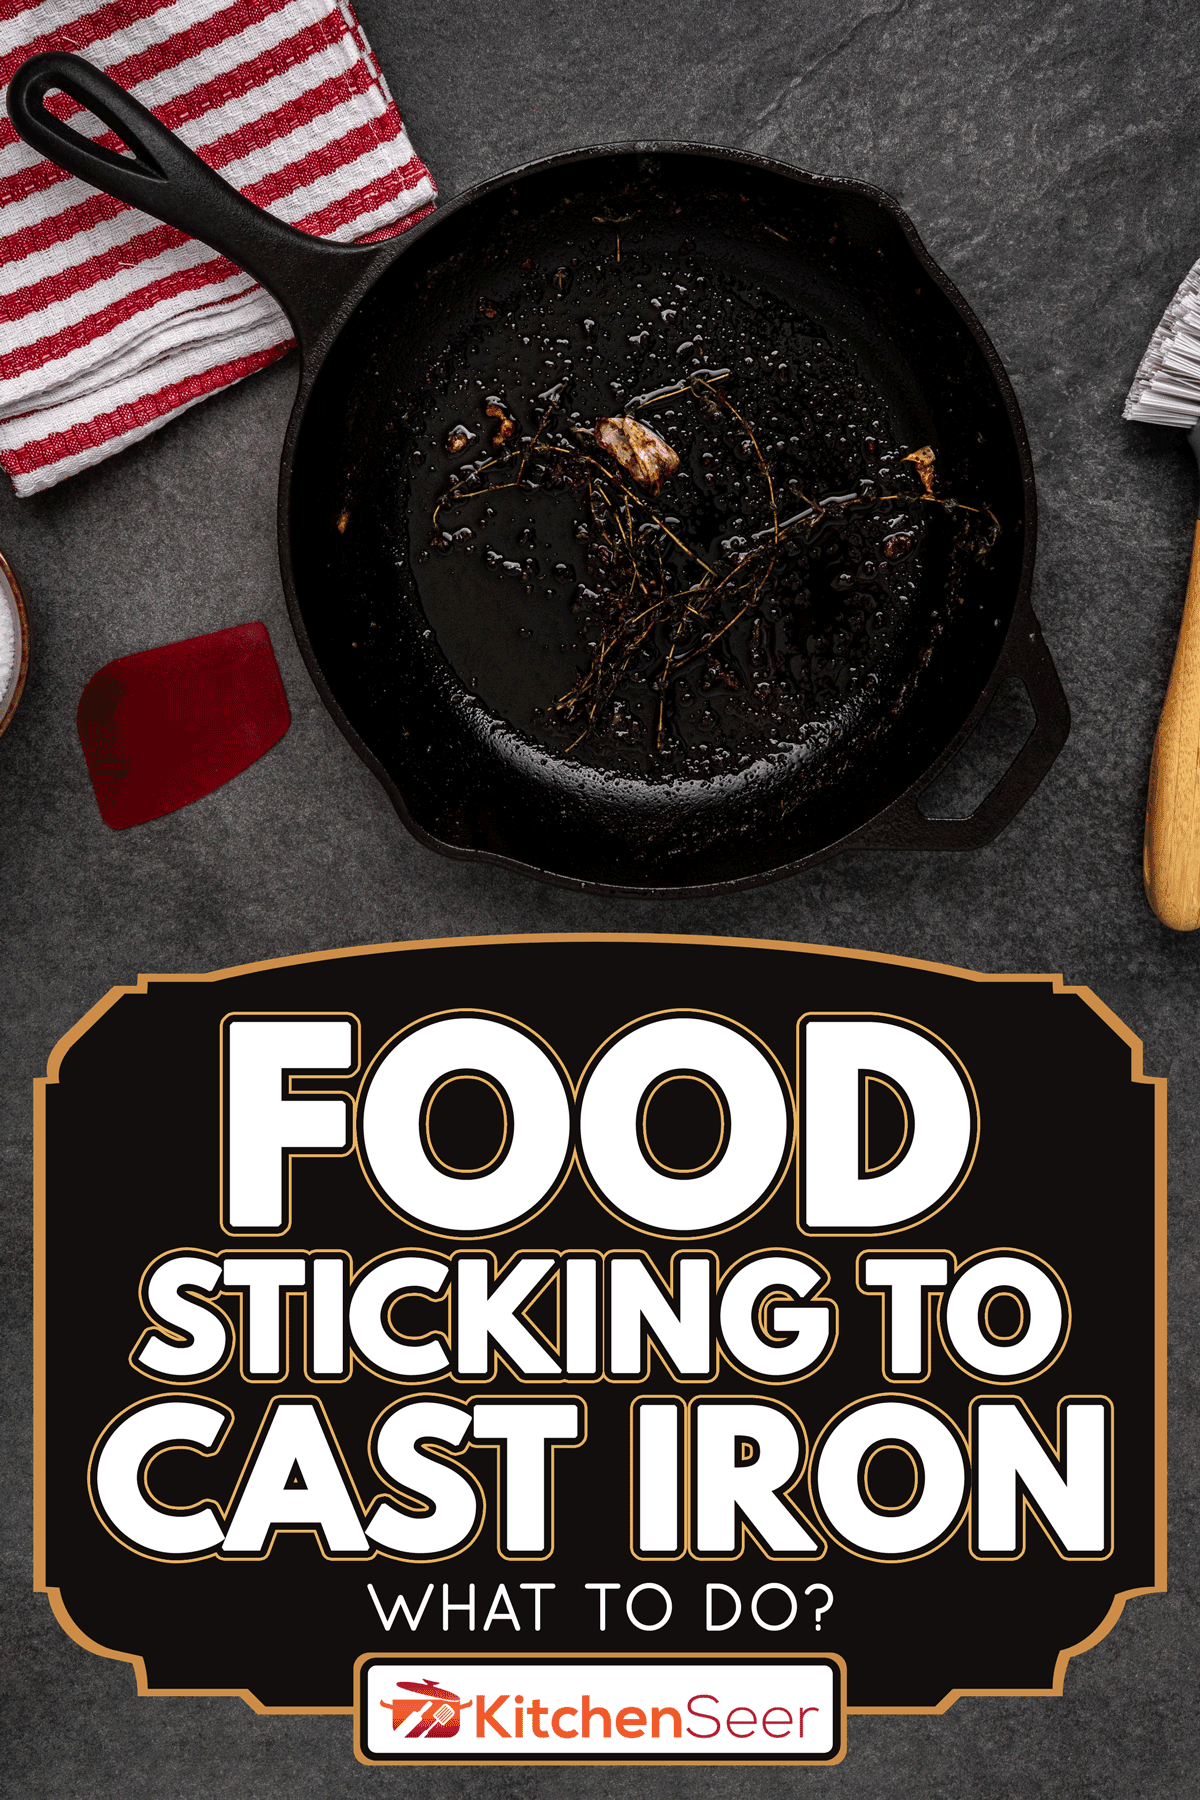 Dirty cast iron skillet being prepared for cleaning, Food Sticking To Cast Iron - What To Do?